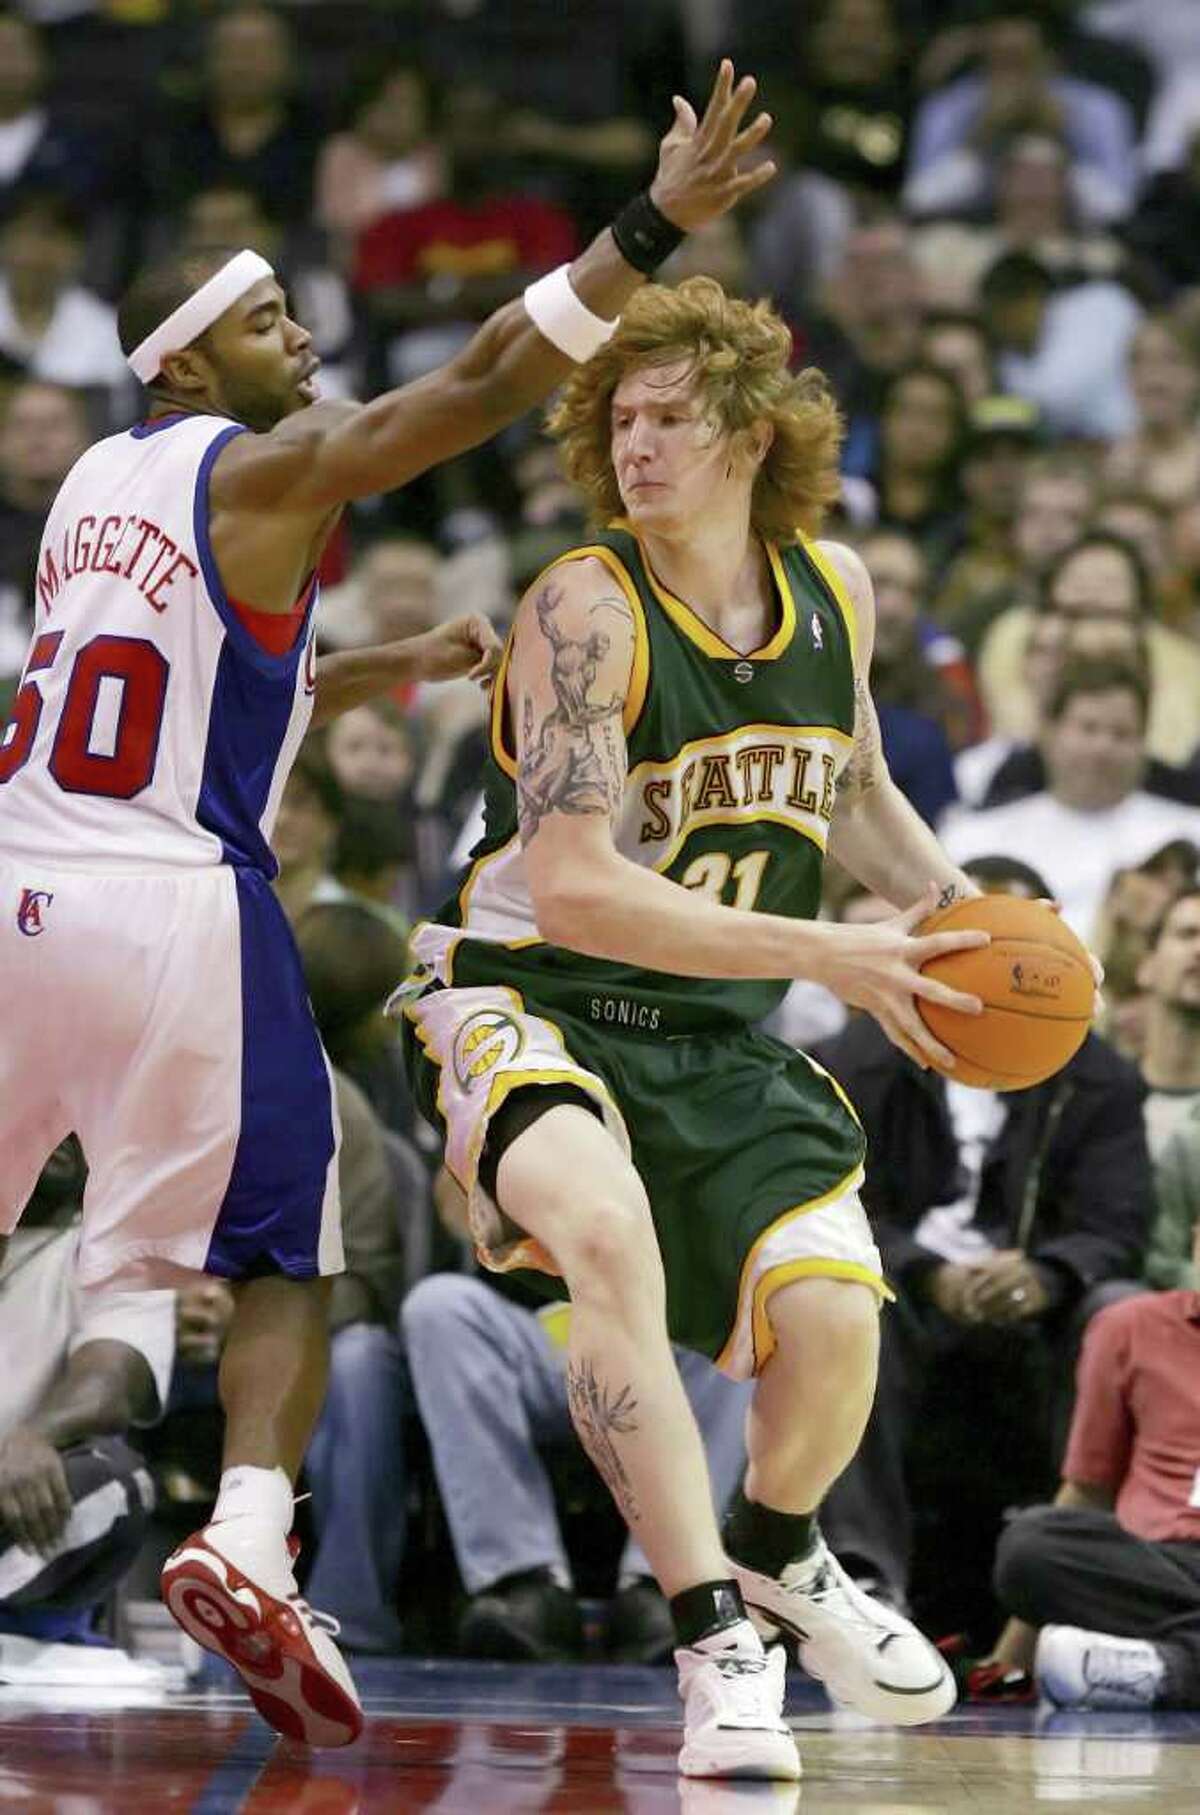 LOS ANGELES - OCTOBER 21: Robert Swift #31 of the Seattle SuperSonics looks to pass against Corey Maggette #50 of the Los Angeles Clippers on October 21, 2006 at Staples Center in Los Angeles, California. The Clippers won 86-82. NOTE TO USER: User expressly acknowledges and agrees that, by downloading and or using this photograph, User is consenting to the terms and conditions of the Getty Images License Agreement.